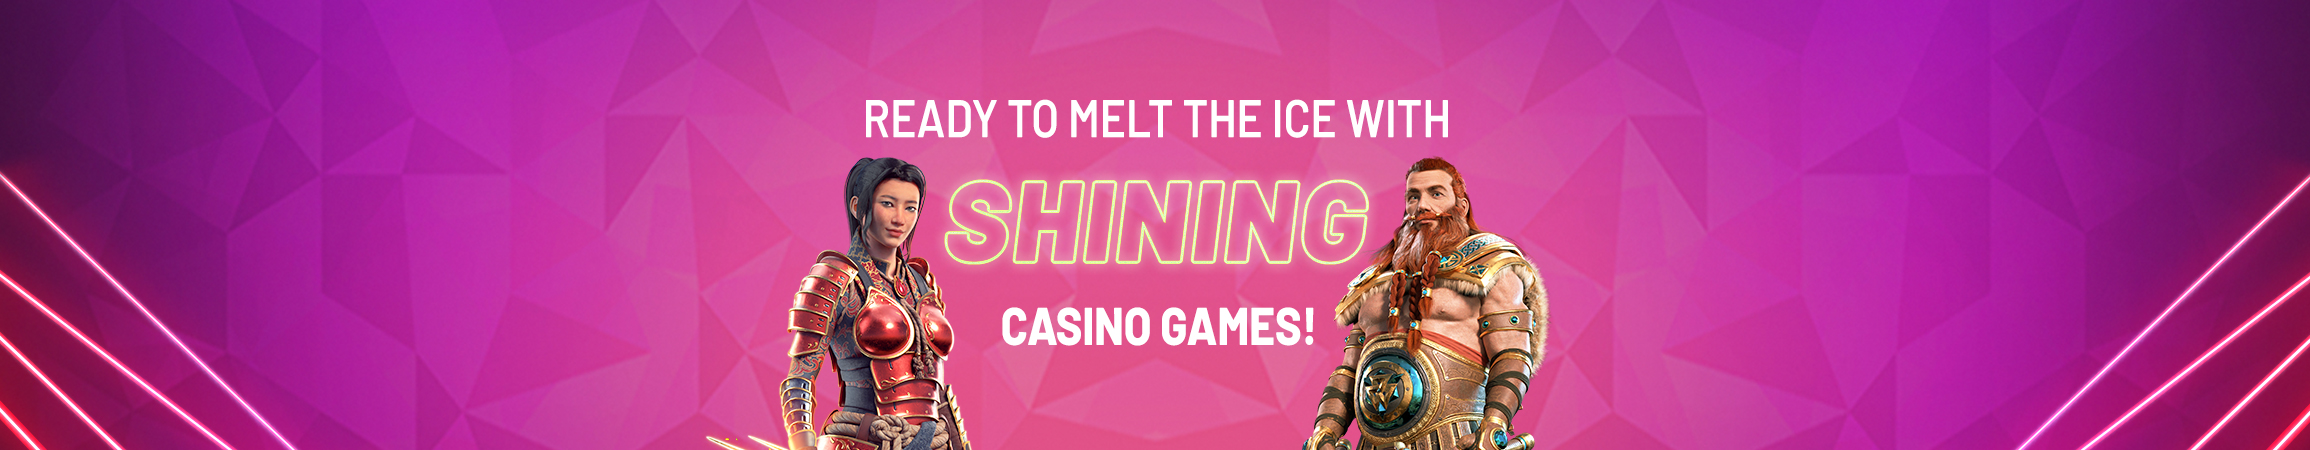 FBM® ready to melt ICE London with shining casino products 